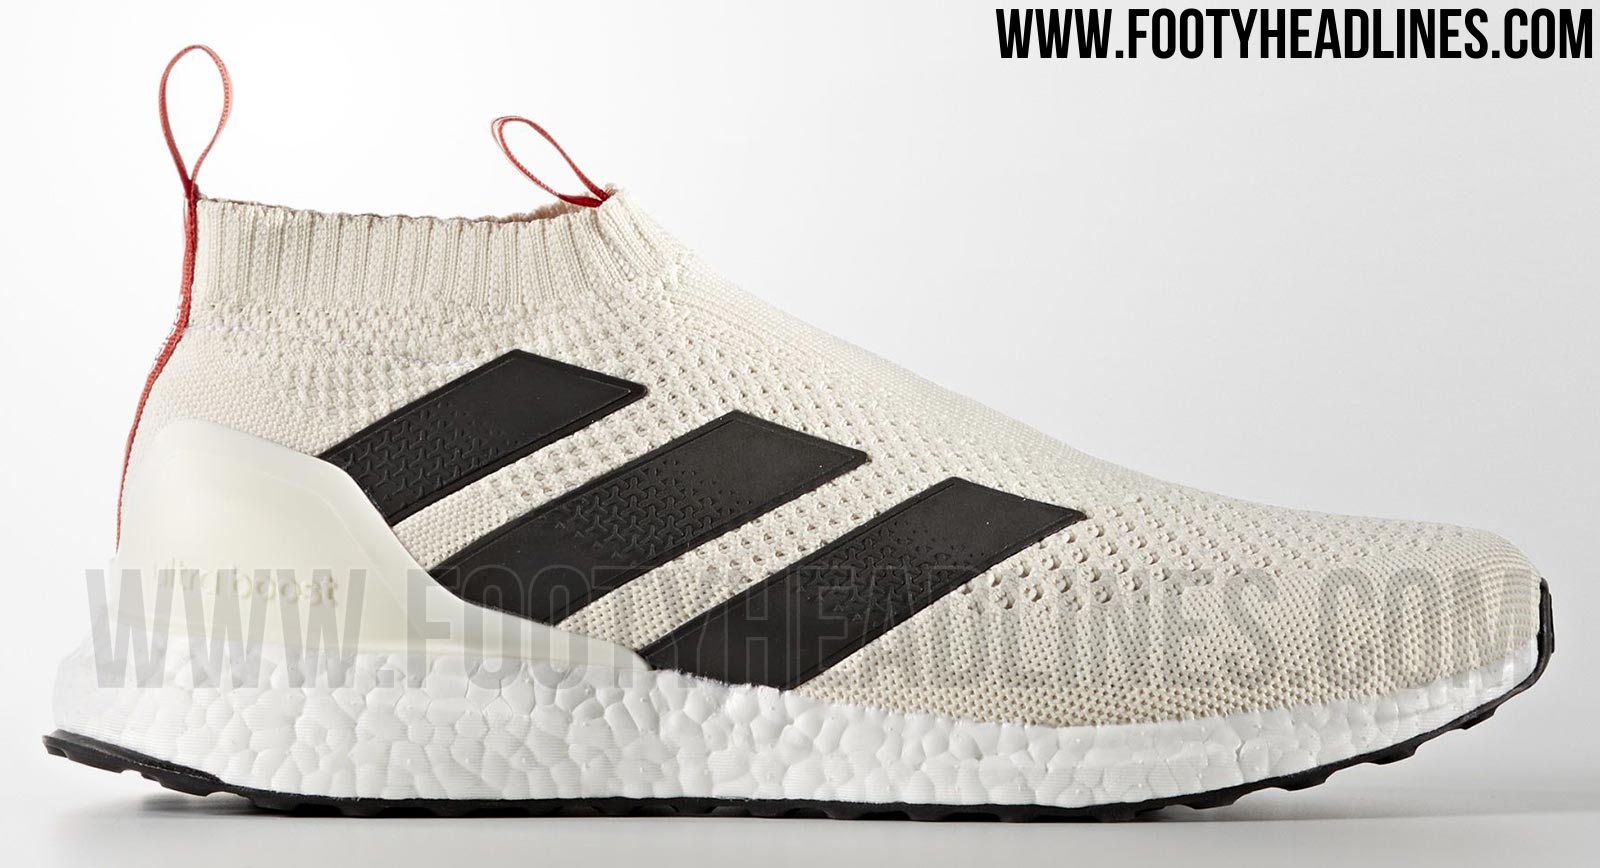 Limited-Edition Adidas Ace PureControl Ultra Boost Champagne Boots Leaked Headlines